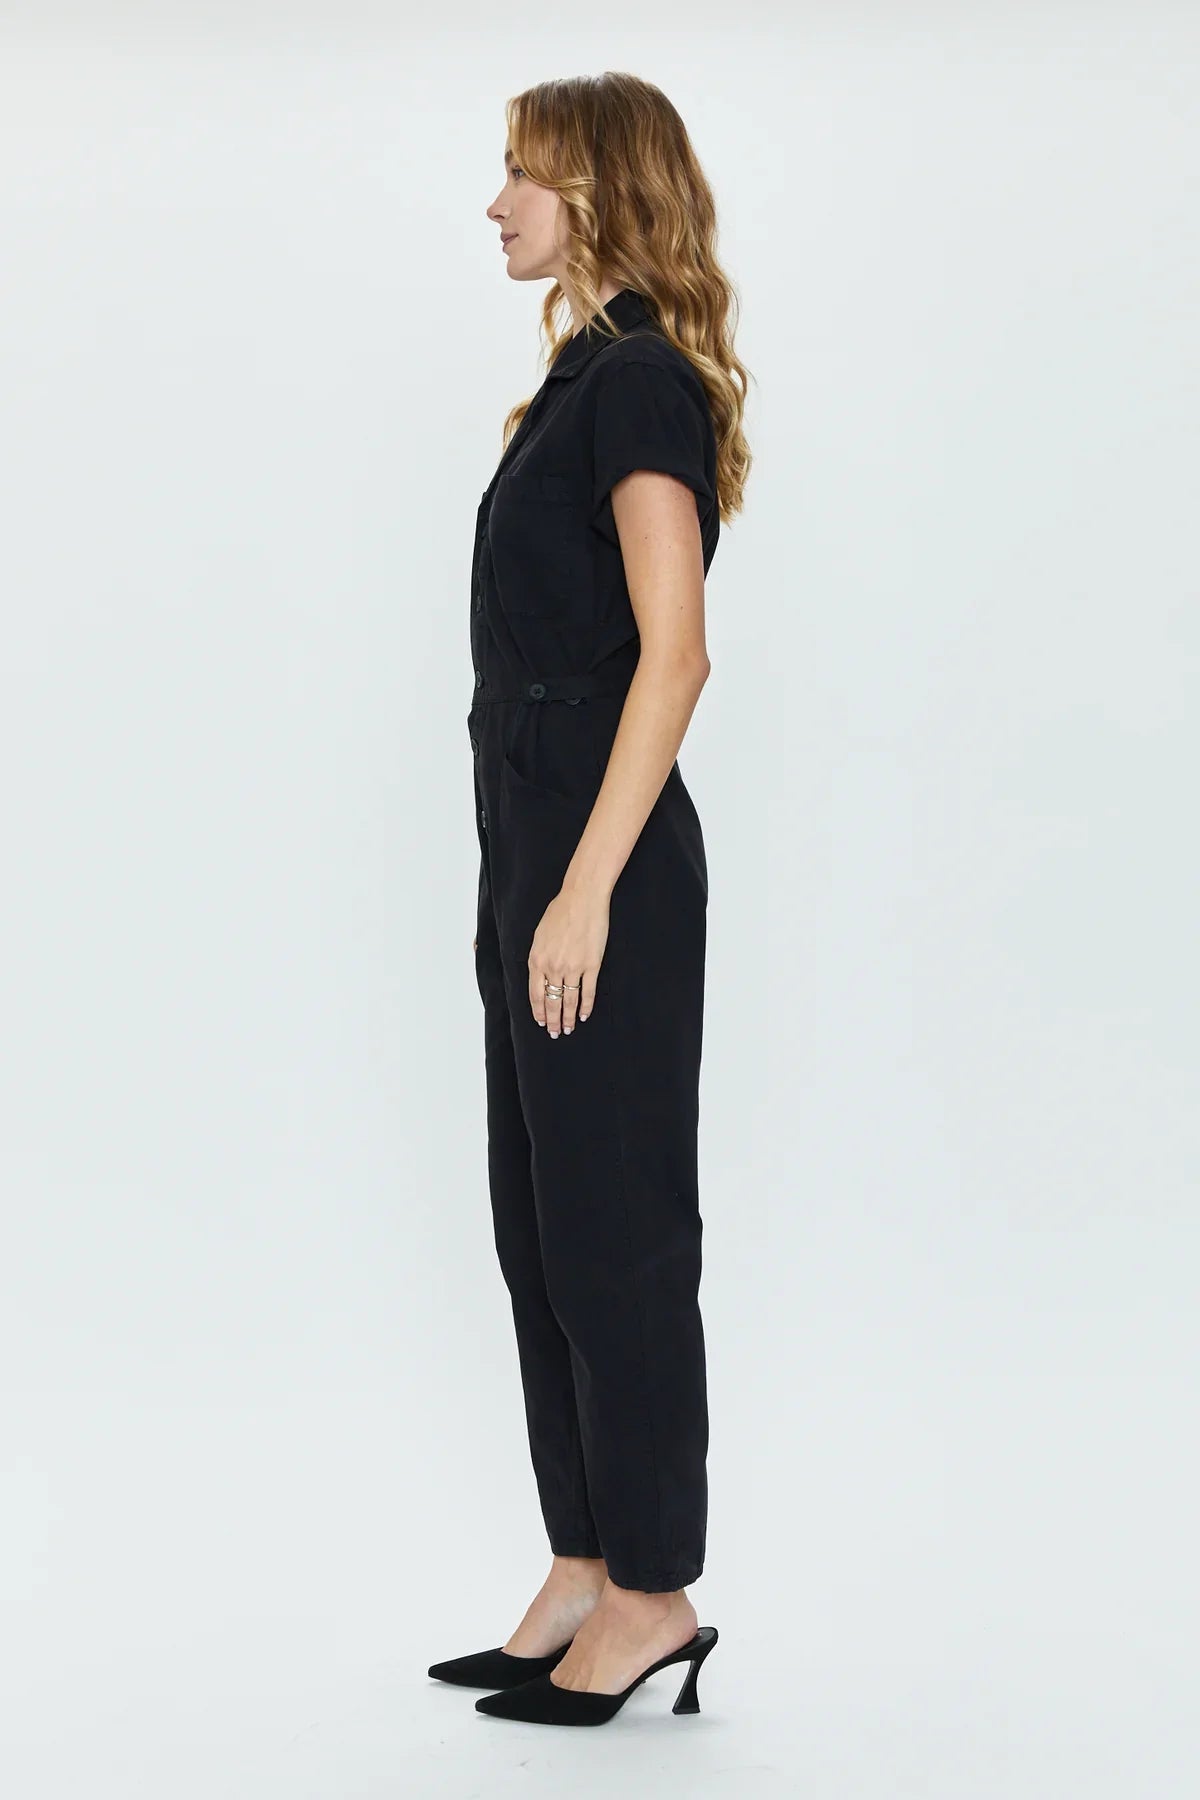 Grover Jumpsuit in Fade to Black